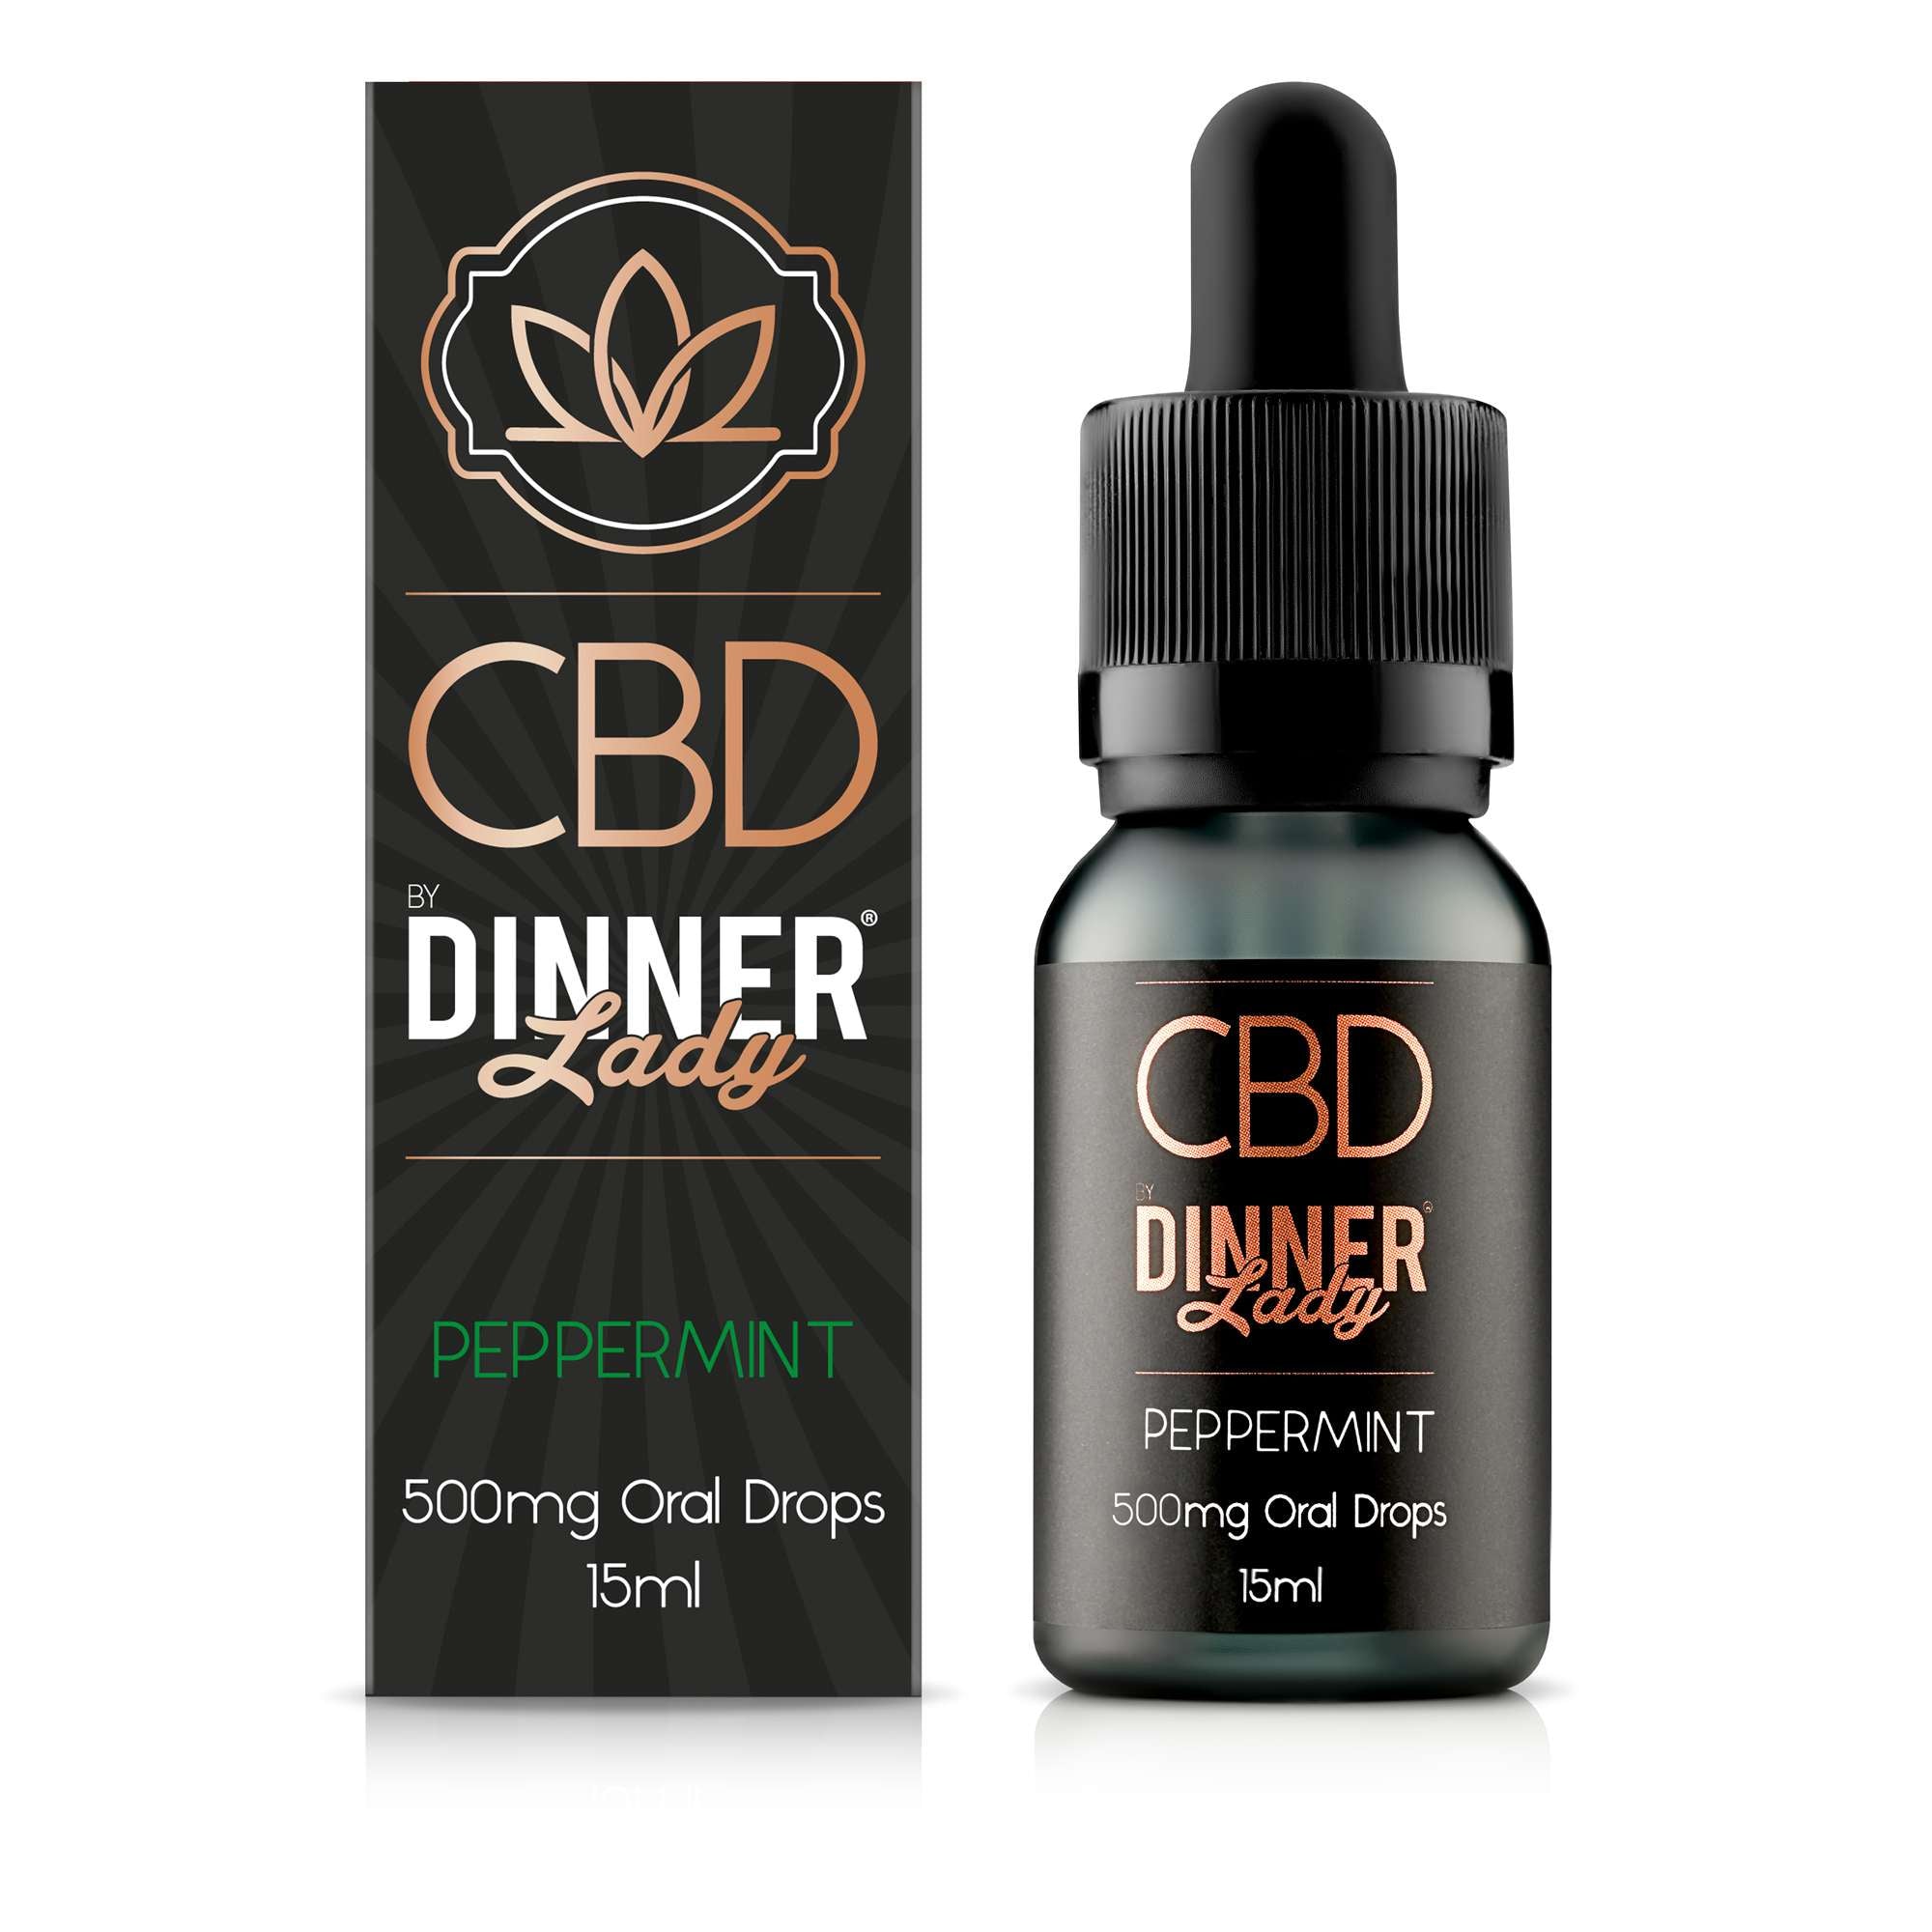 Dinner Lady CBD Peppermint oral drops / tinctures - 15ml - 500mg